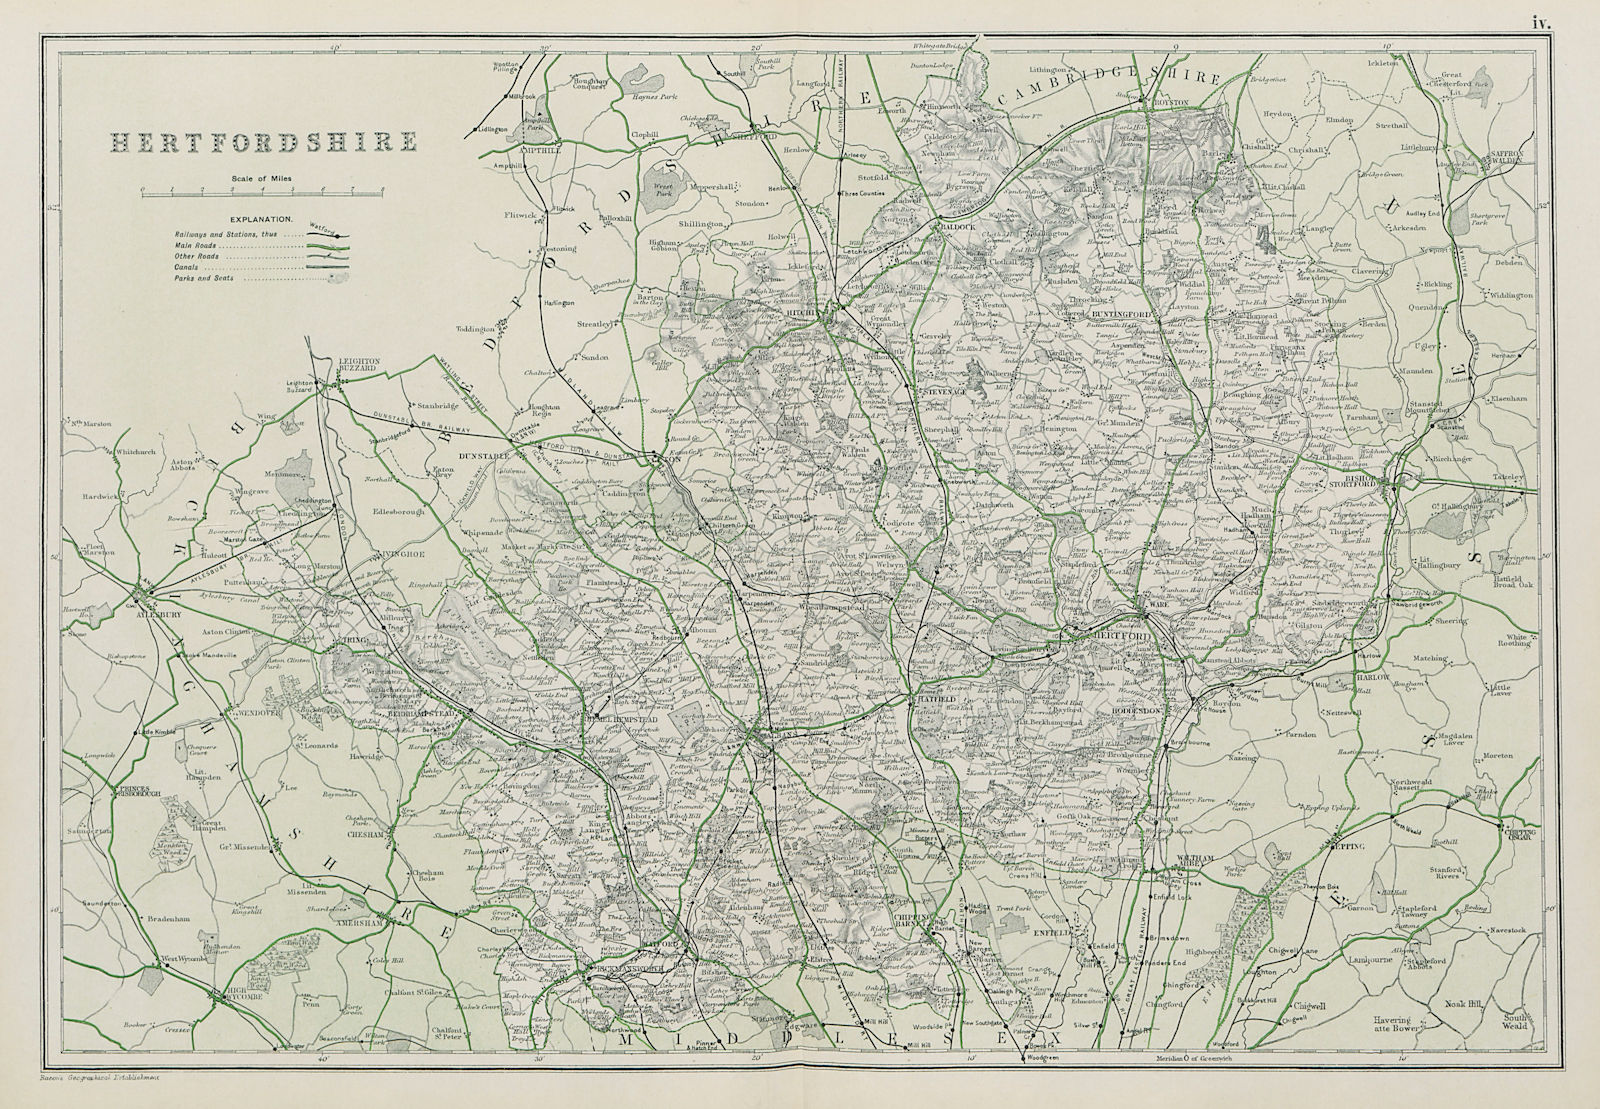 Associate Product HERTFORDSHIRE. Showing Parliamentary divisions, boroughs & parks. BACON 1913 map